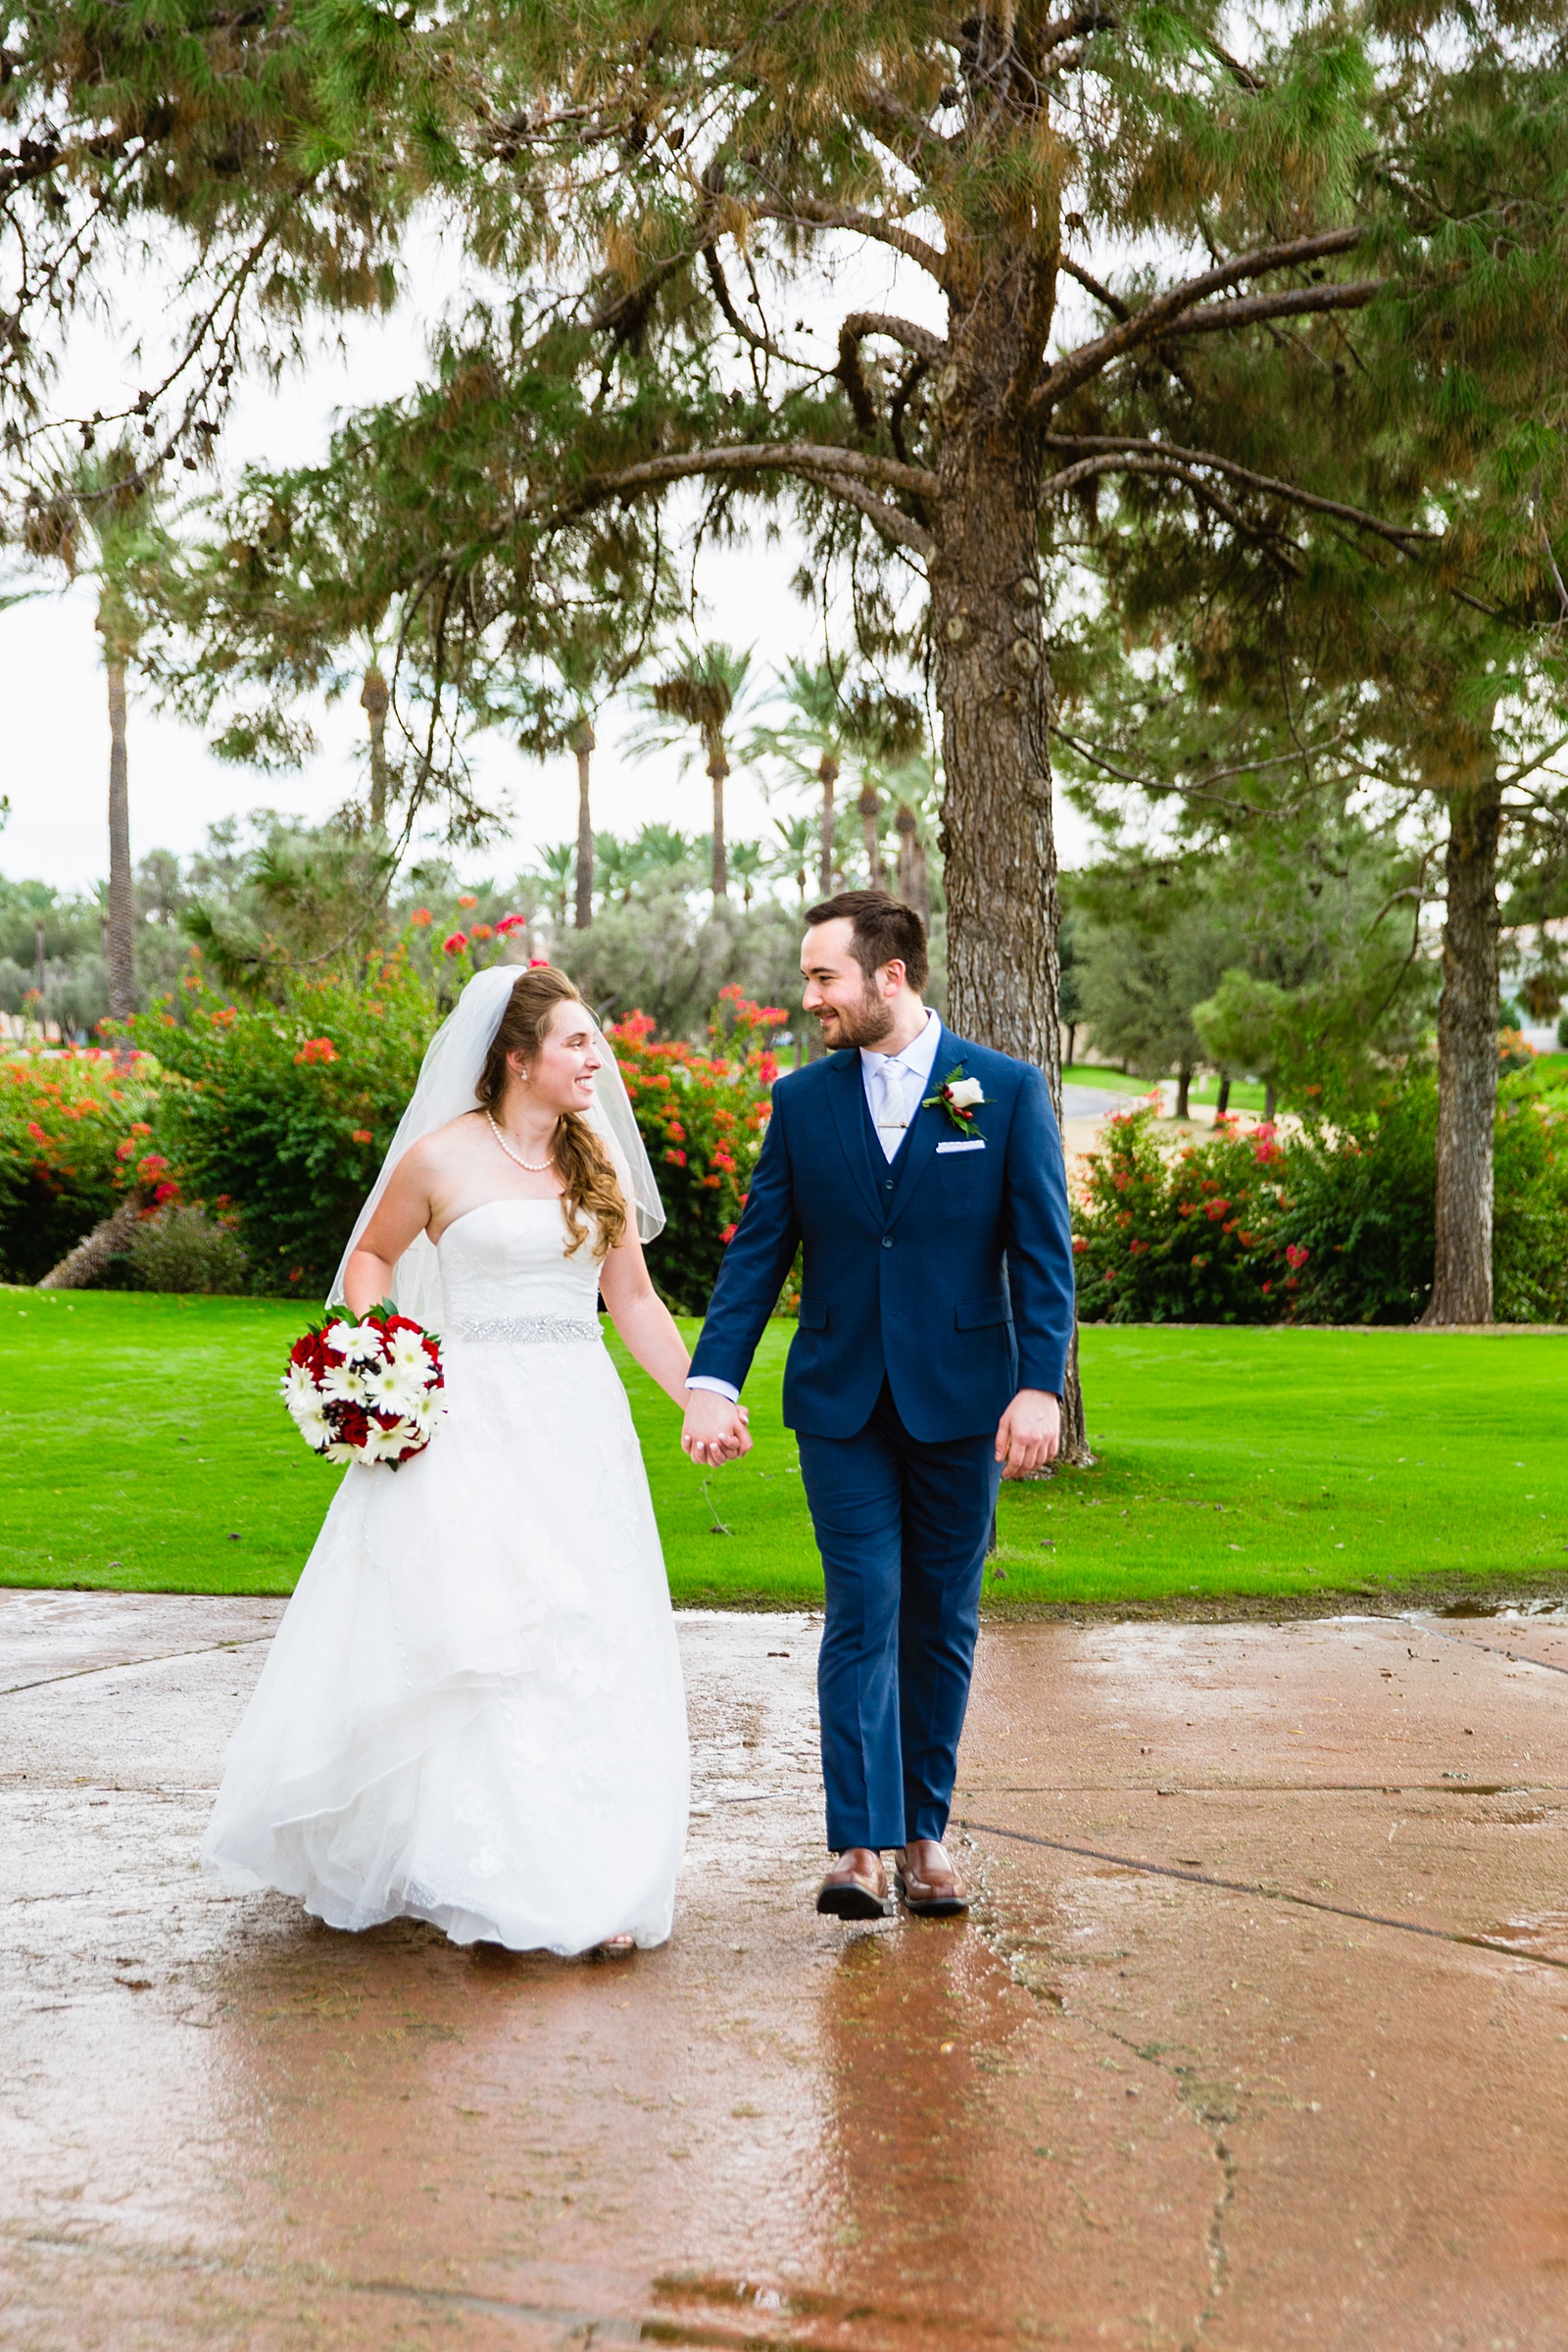 Bride and Groom walking together during their Ocotillo Oasis wedding by Arizona wedding photographer PMA Photography.